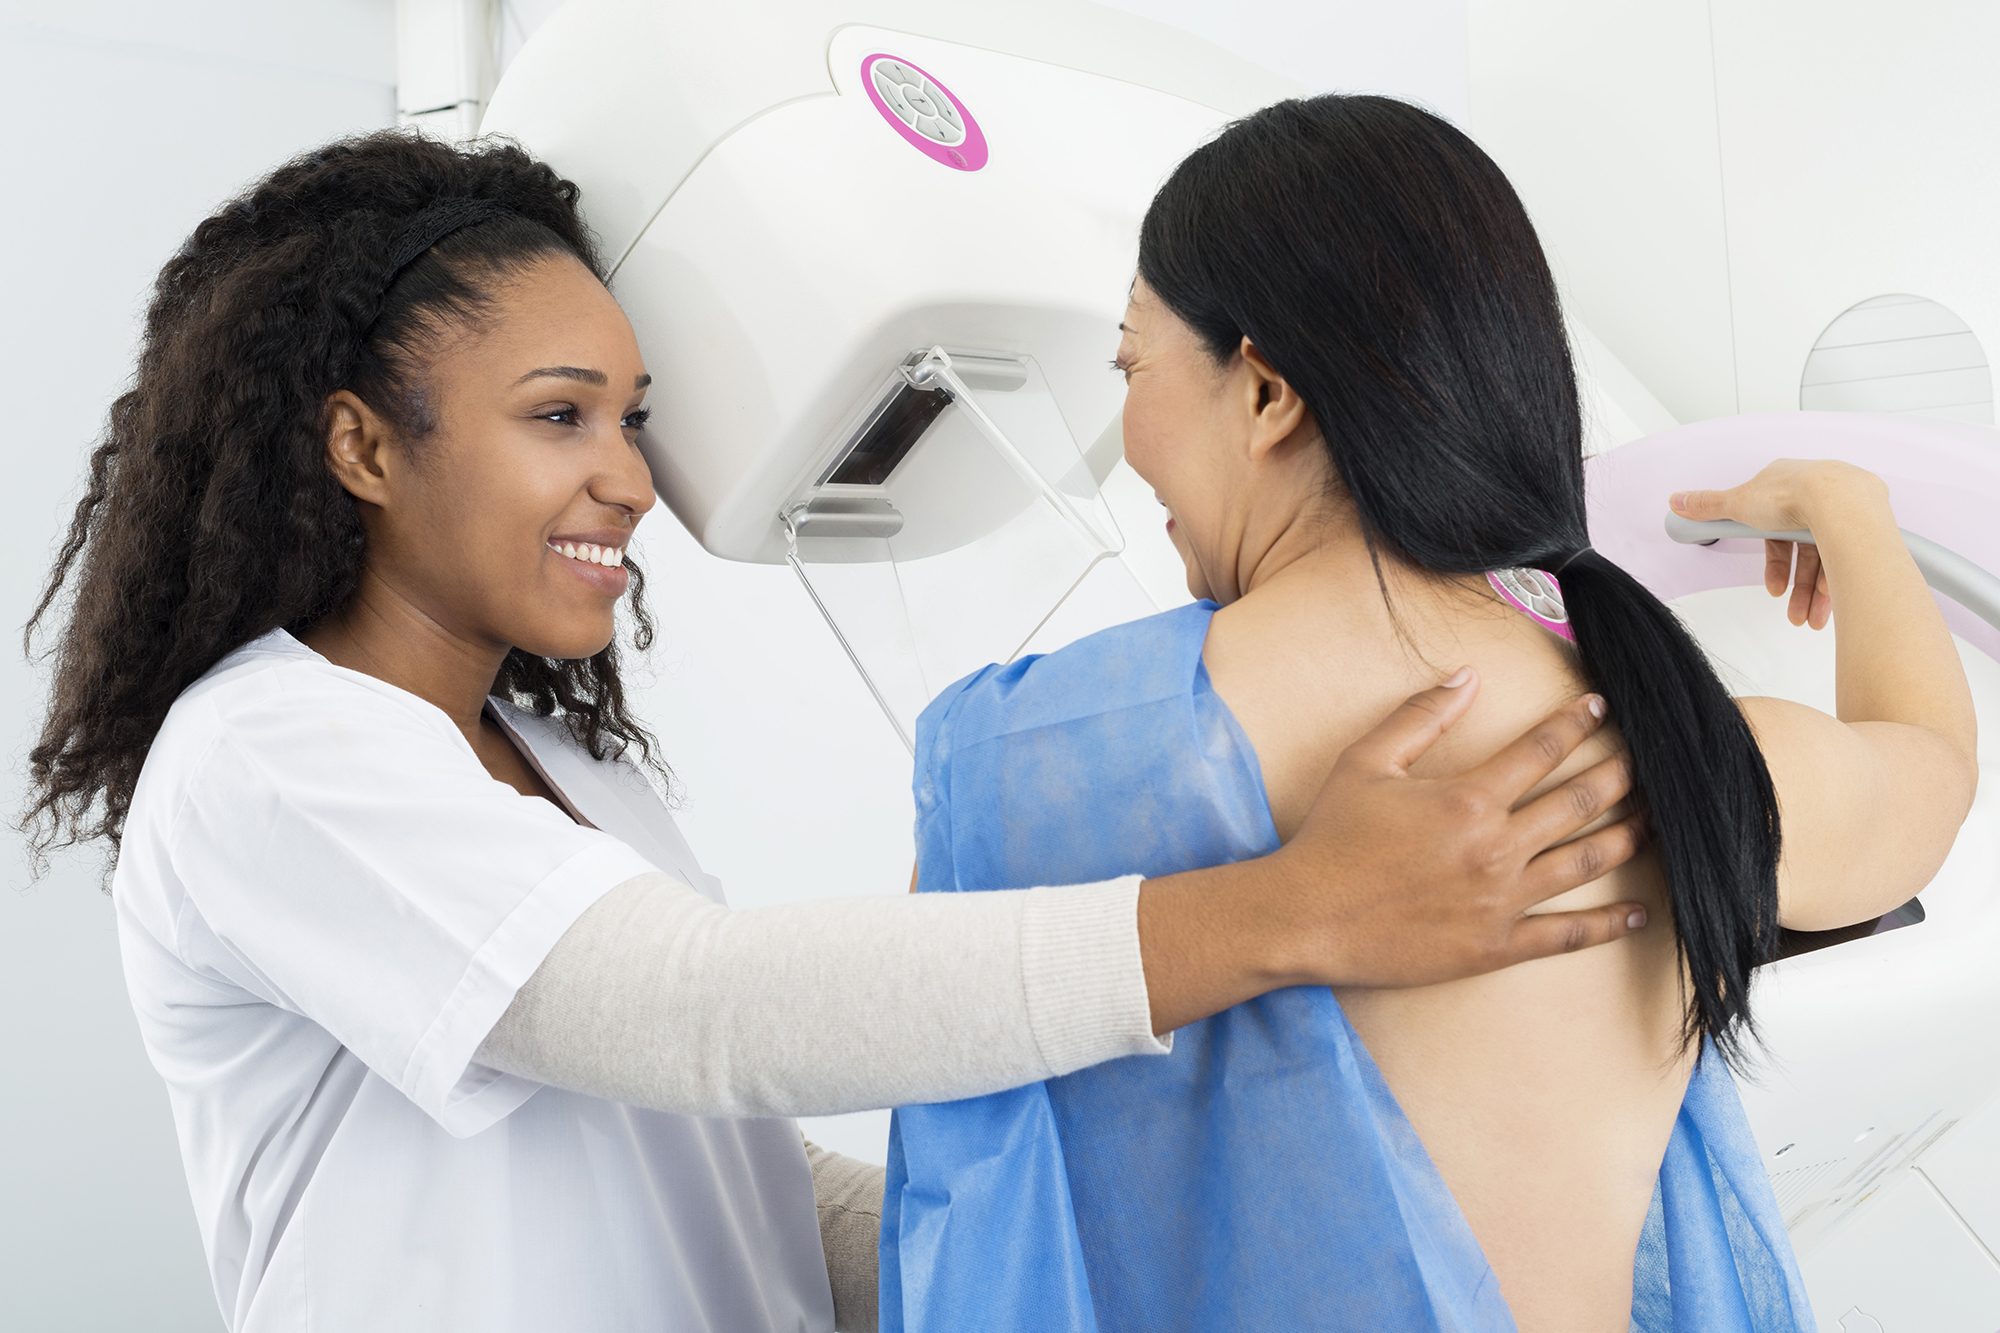 Breast screening scandal: Can the NHS handle the bigger picture?